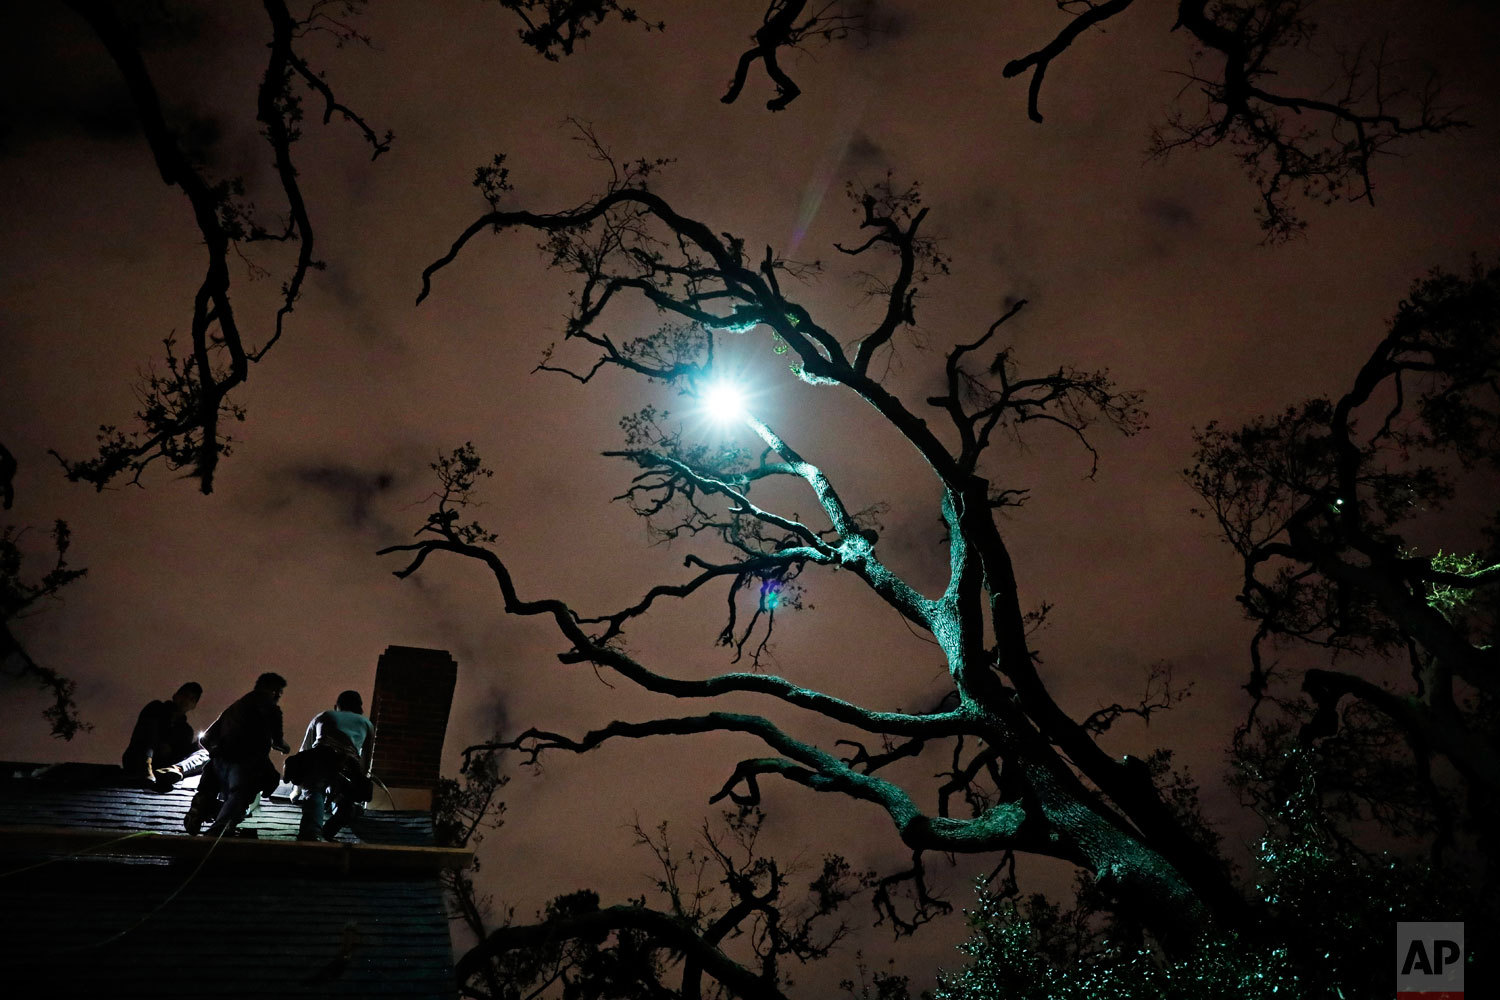  Workers repair a roof at night under trees left bare by Hurricane Michael in Panama City, Fla, Tuesday, Jan. 22, 2019. Some residents have been able to make their homes livable again with cosmetic repairs. Others simply left town: The county's stude